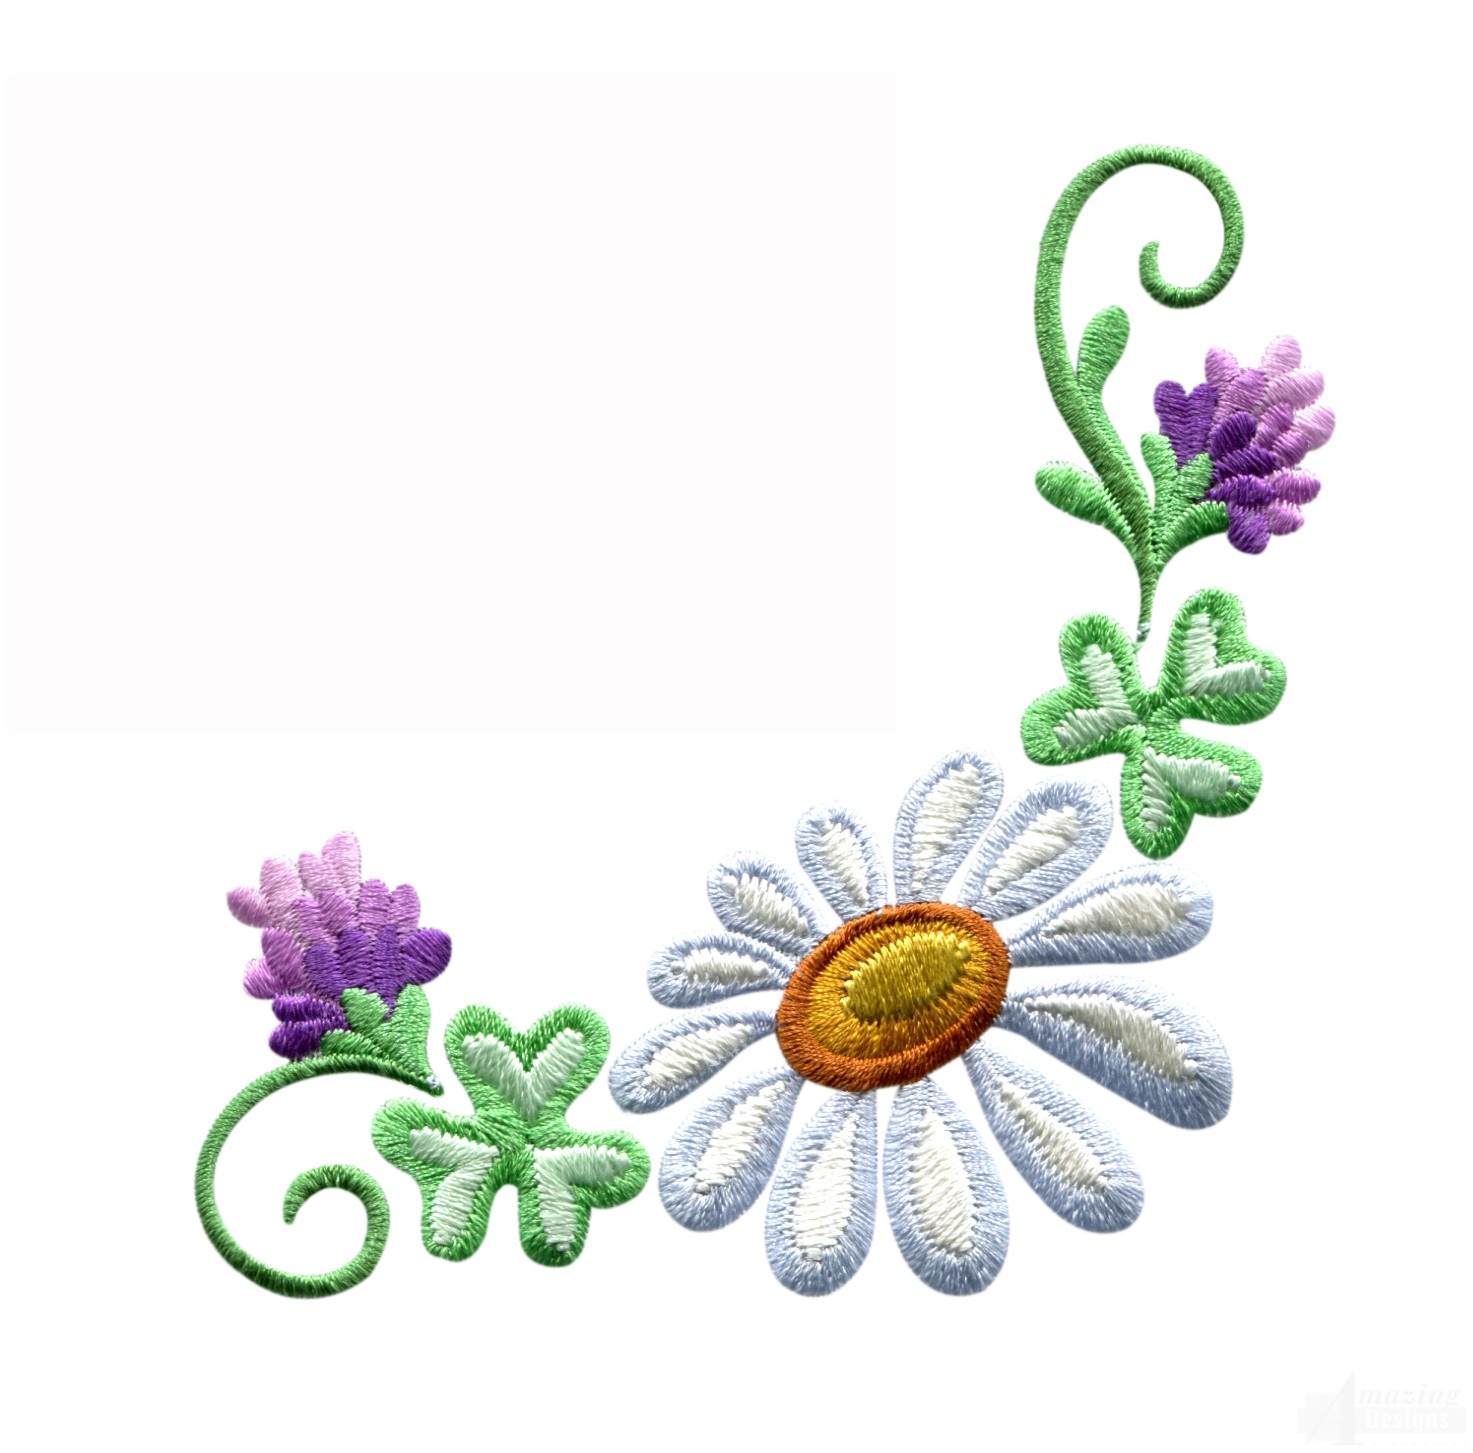 Free download Daisy Floral Border Embroidery Design